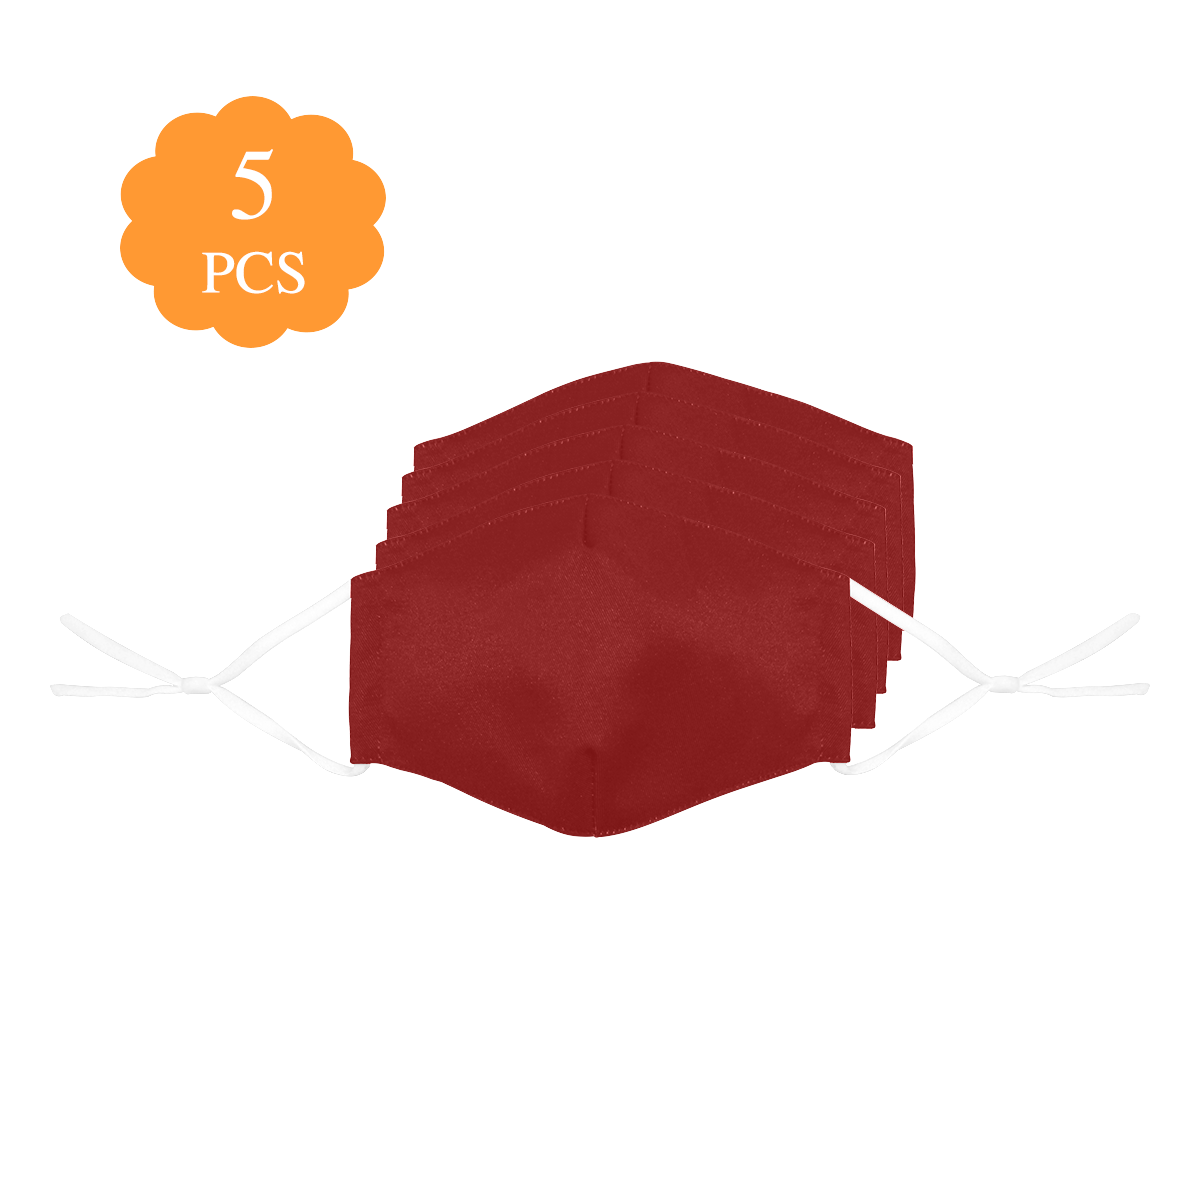 color maroon 3D Mouth Mask with Drawstring (Pack of 5) (Model M04)